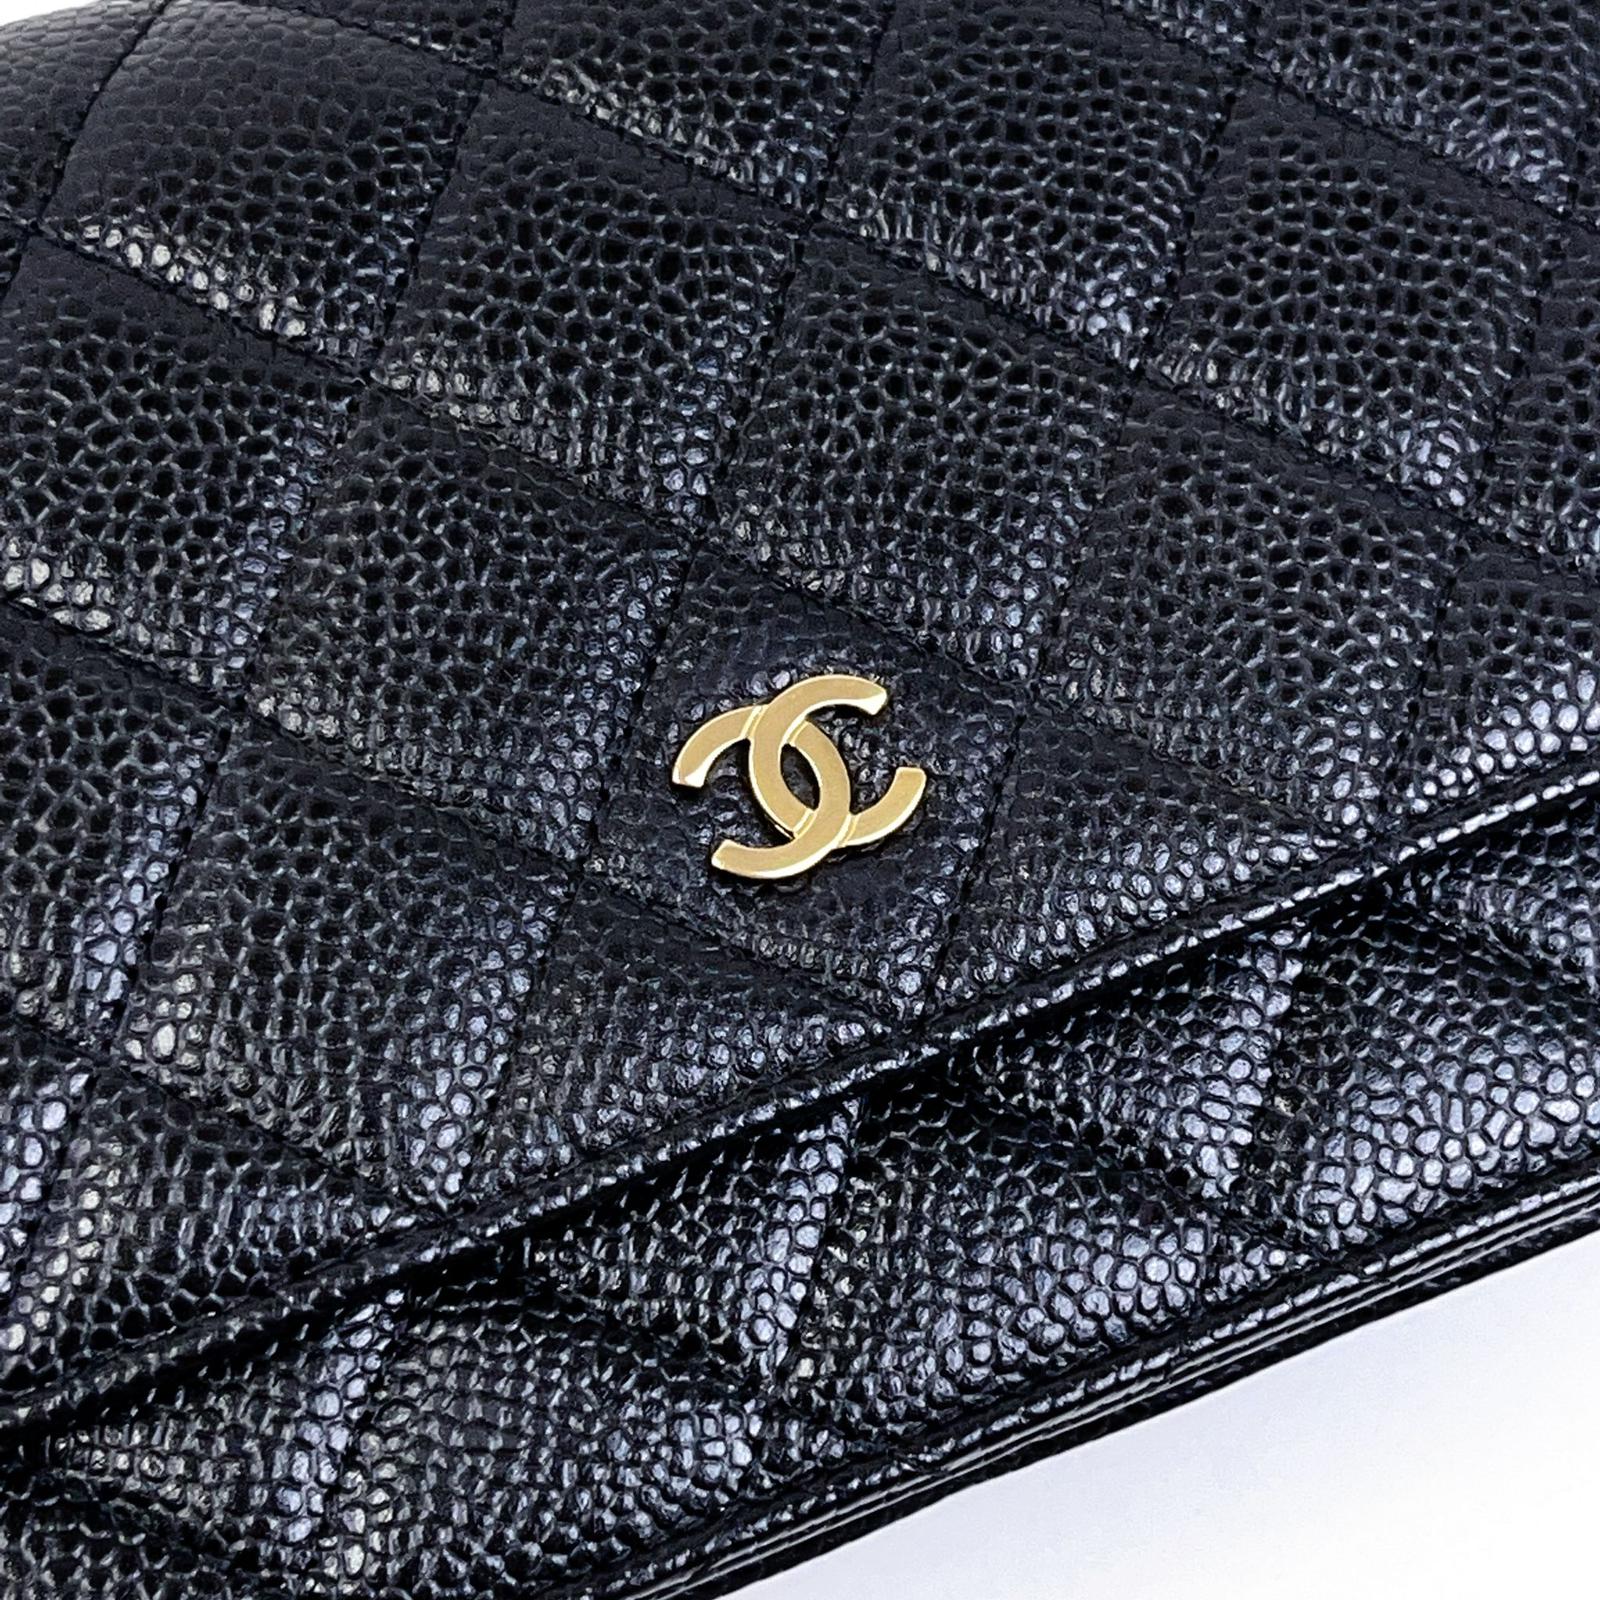 Chanel Wallet On Chain WOC